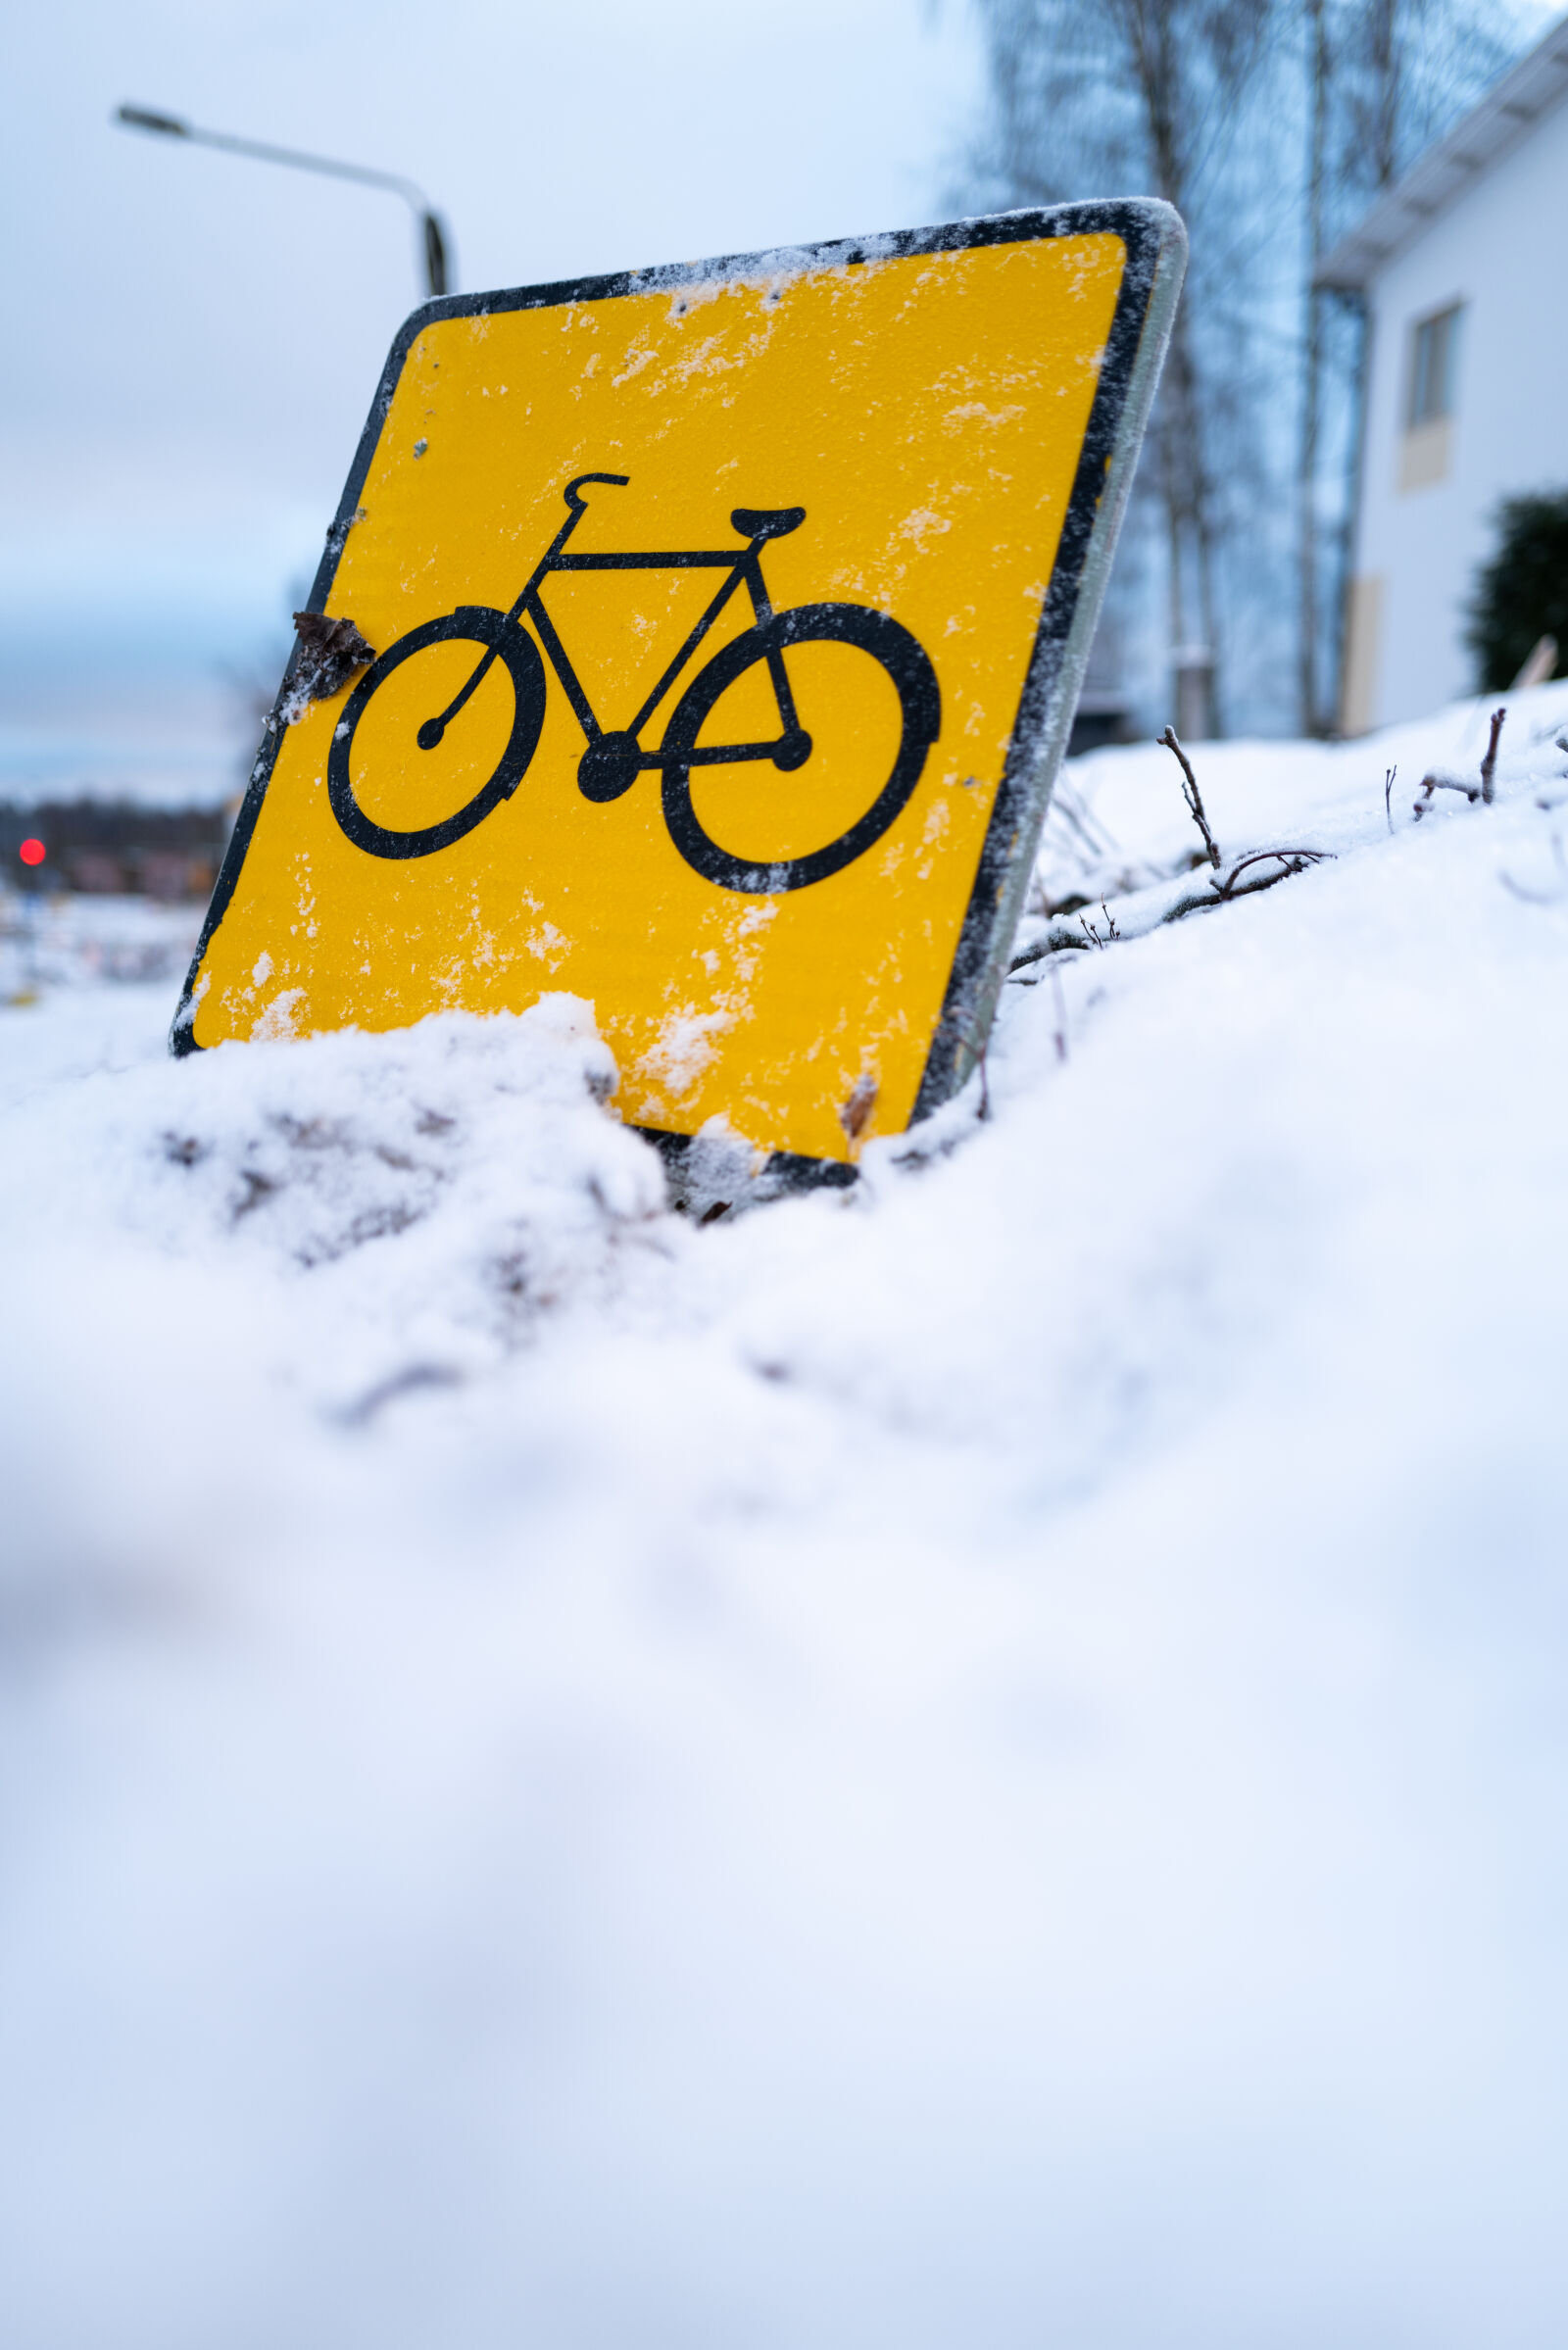 SUMMILUX 1:1.7/28 ASPH. sample photo. Sign for winter cyclist photography